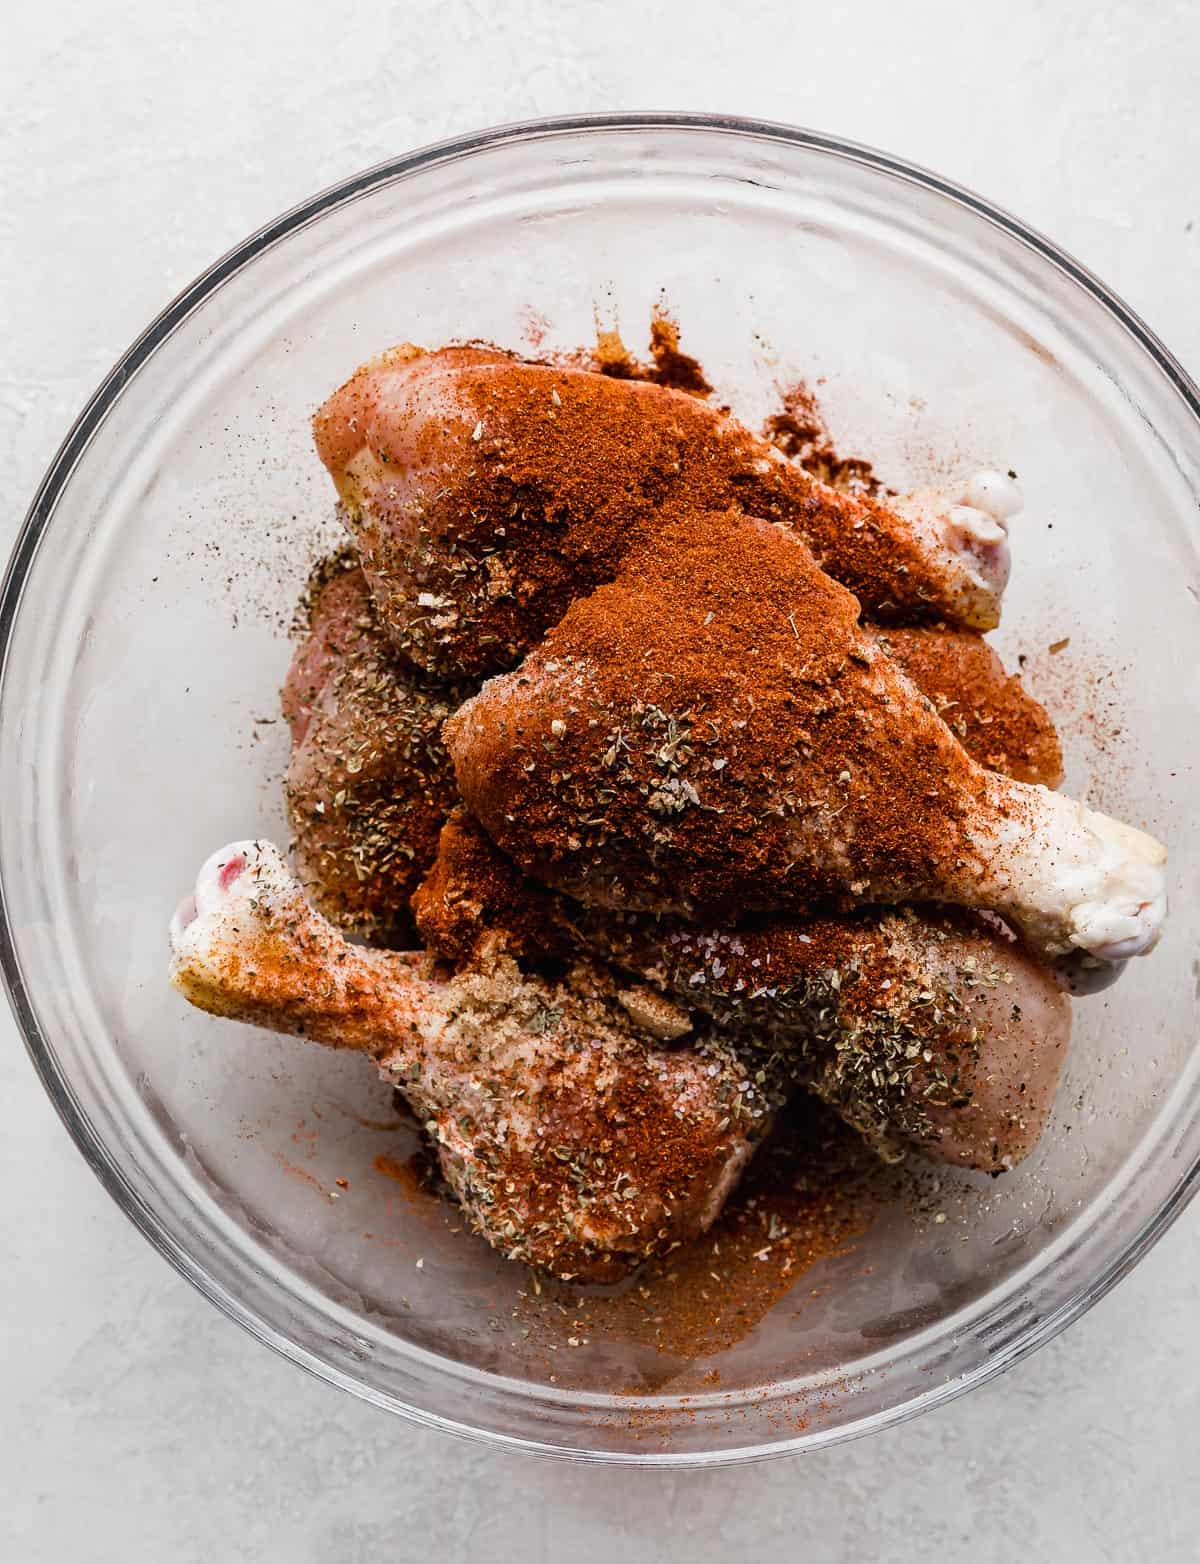 Dried spices such as paprika, Italian seasoning, salt, and pepper sprinkled overtop raw chicken legs that are in a glass bowl.